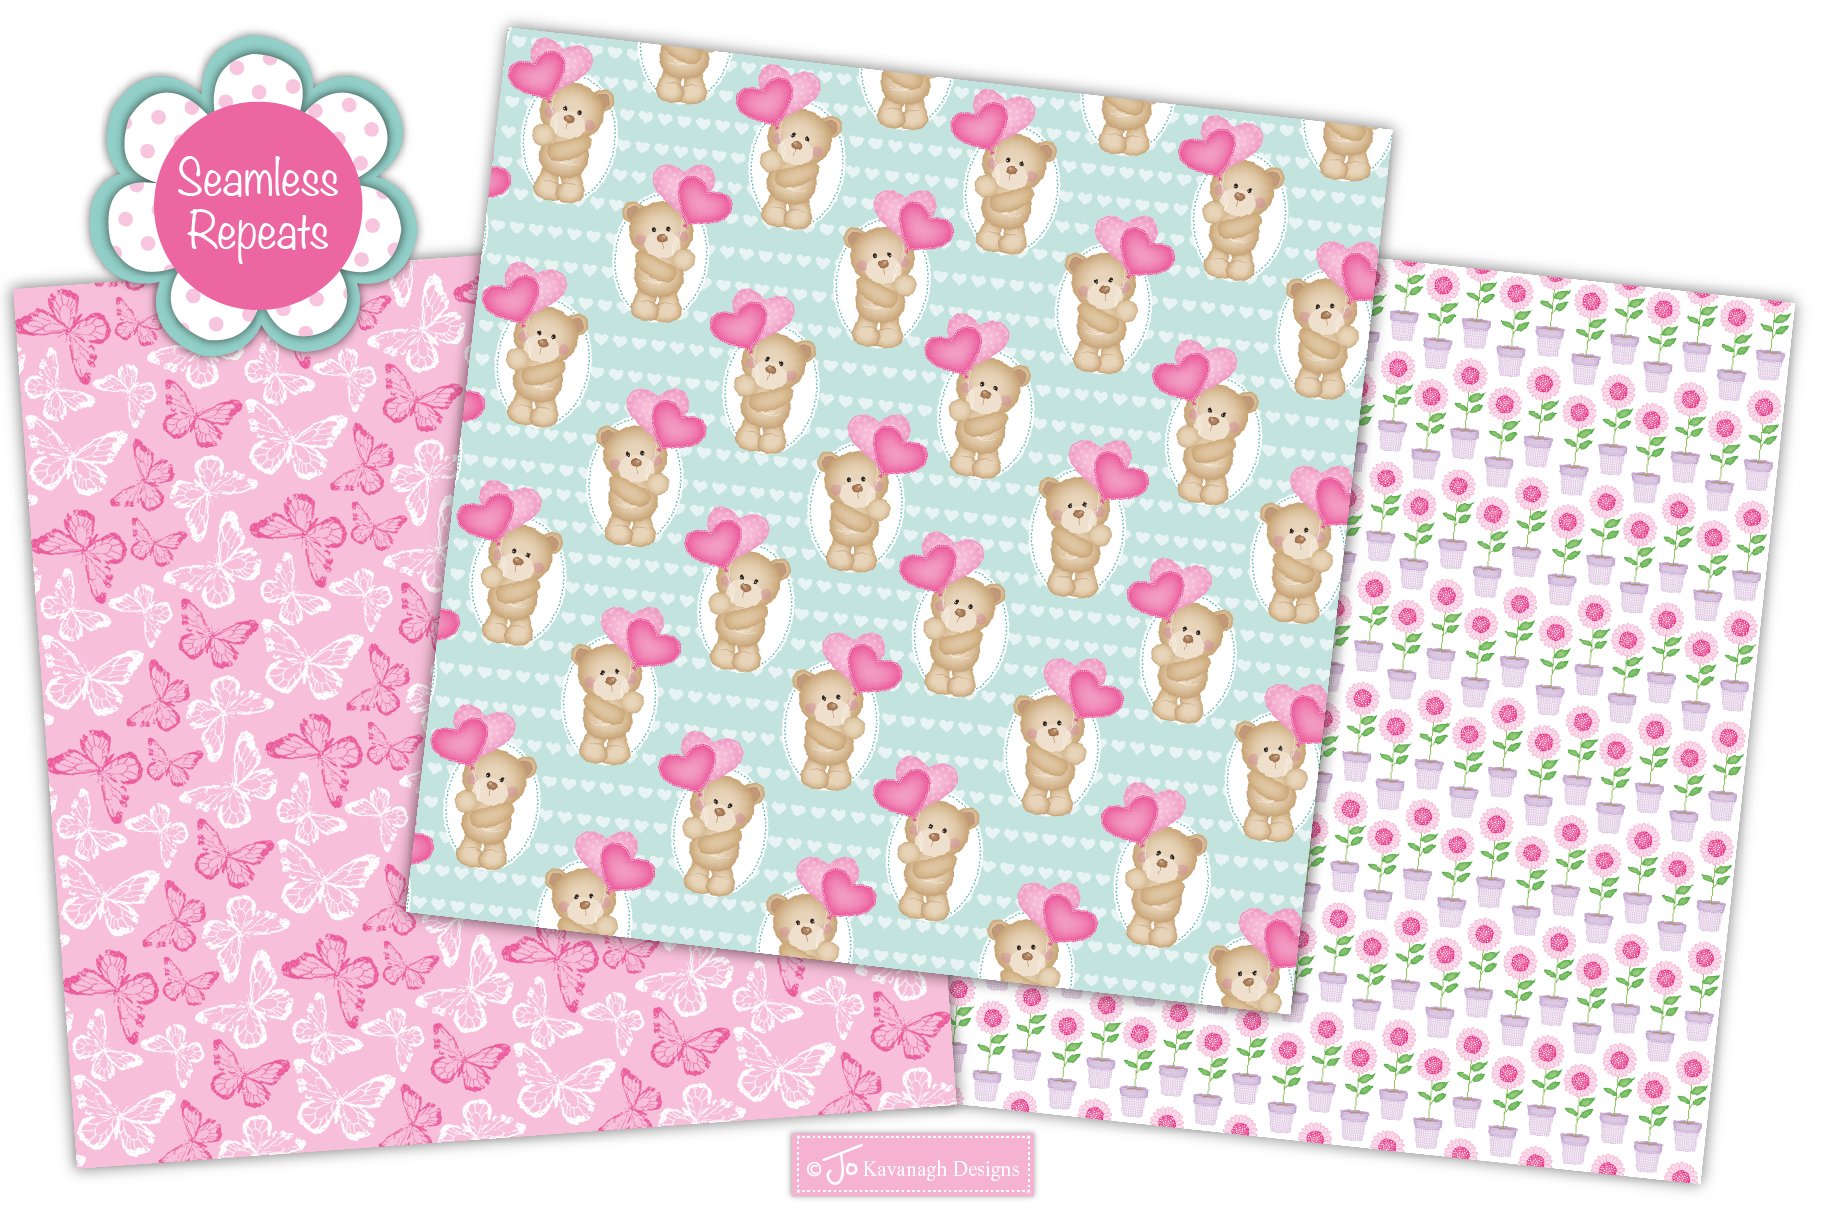 Cute Mother's day patterns with bears and hearts.